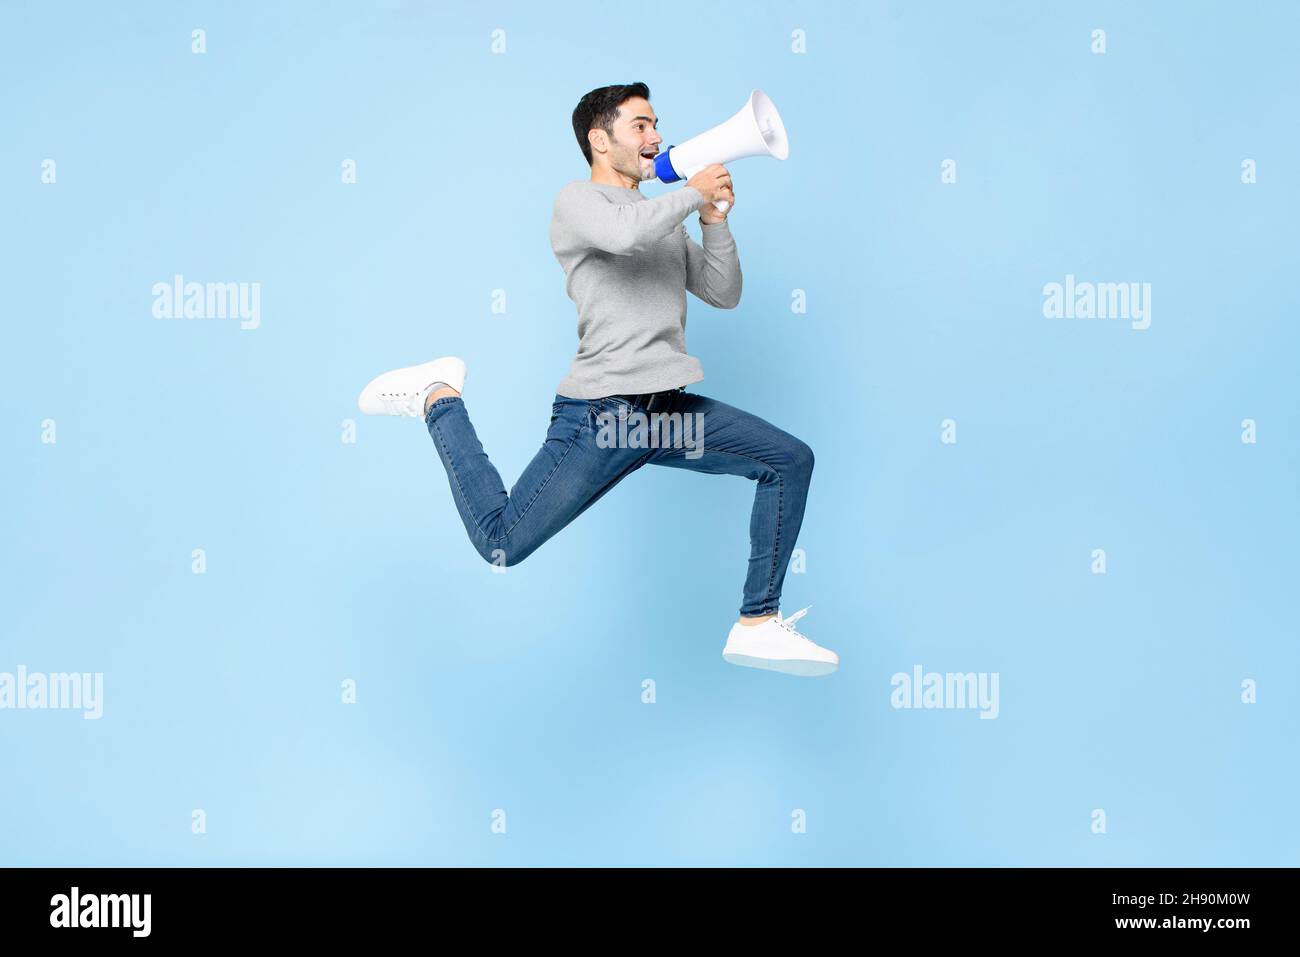 Portrait of energetic young Caucasian man jumping with megaphone isolated on light blue background Stock Photo